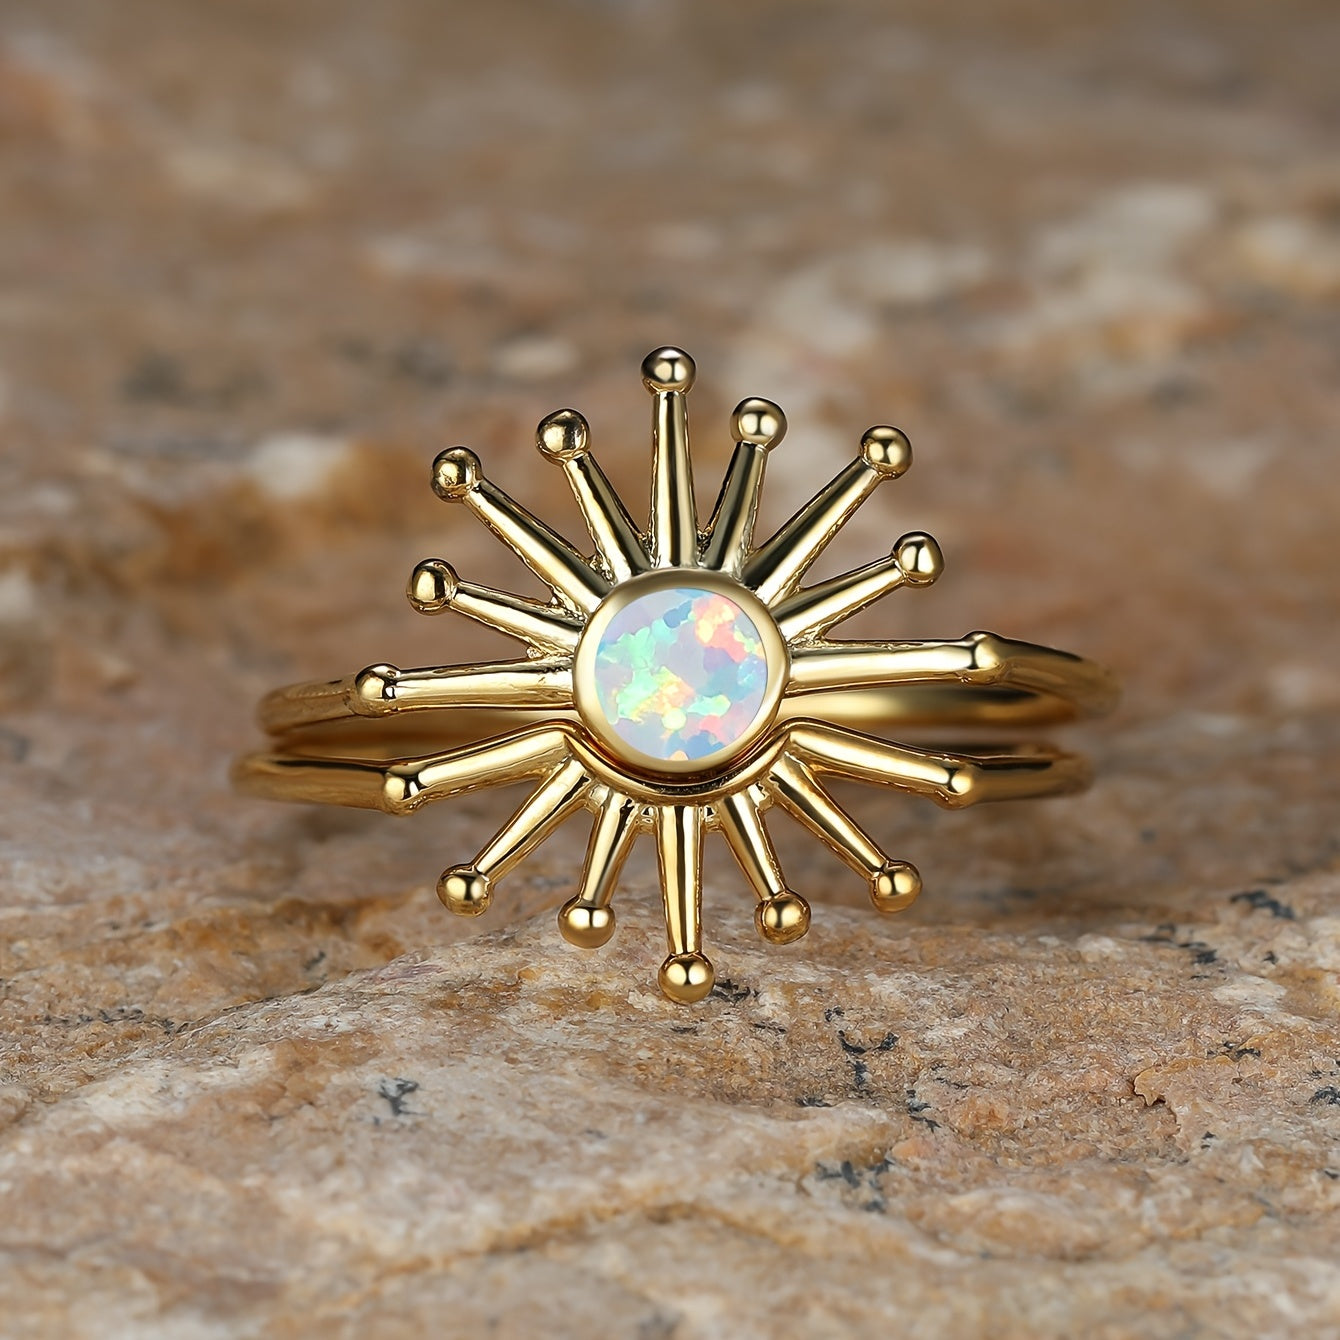 Gorgeous 18K Gold Plated Opal Sun Ring - Perfect for Weddings, Engagements & Gifts!